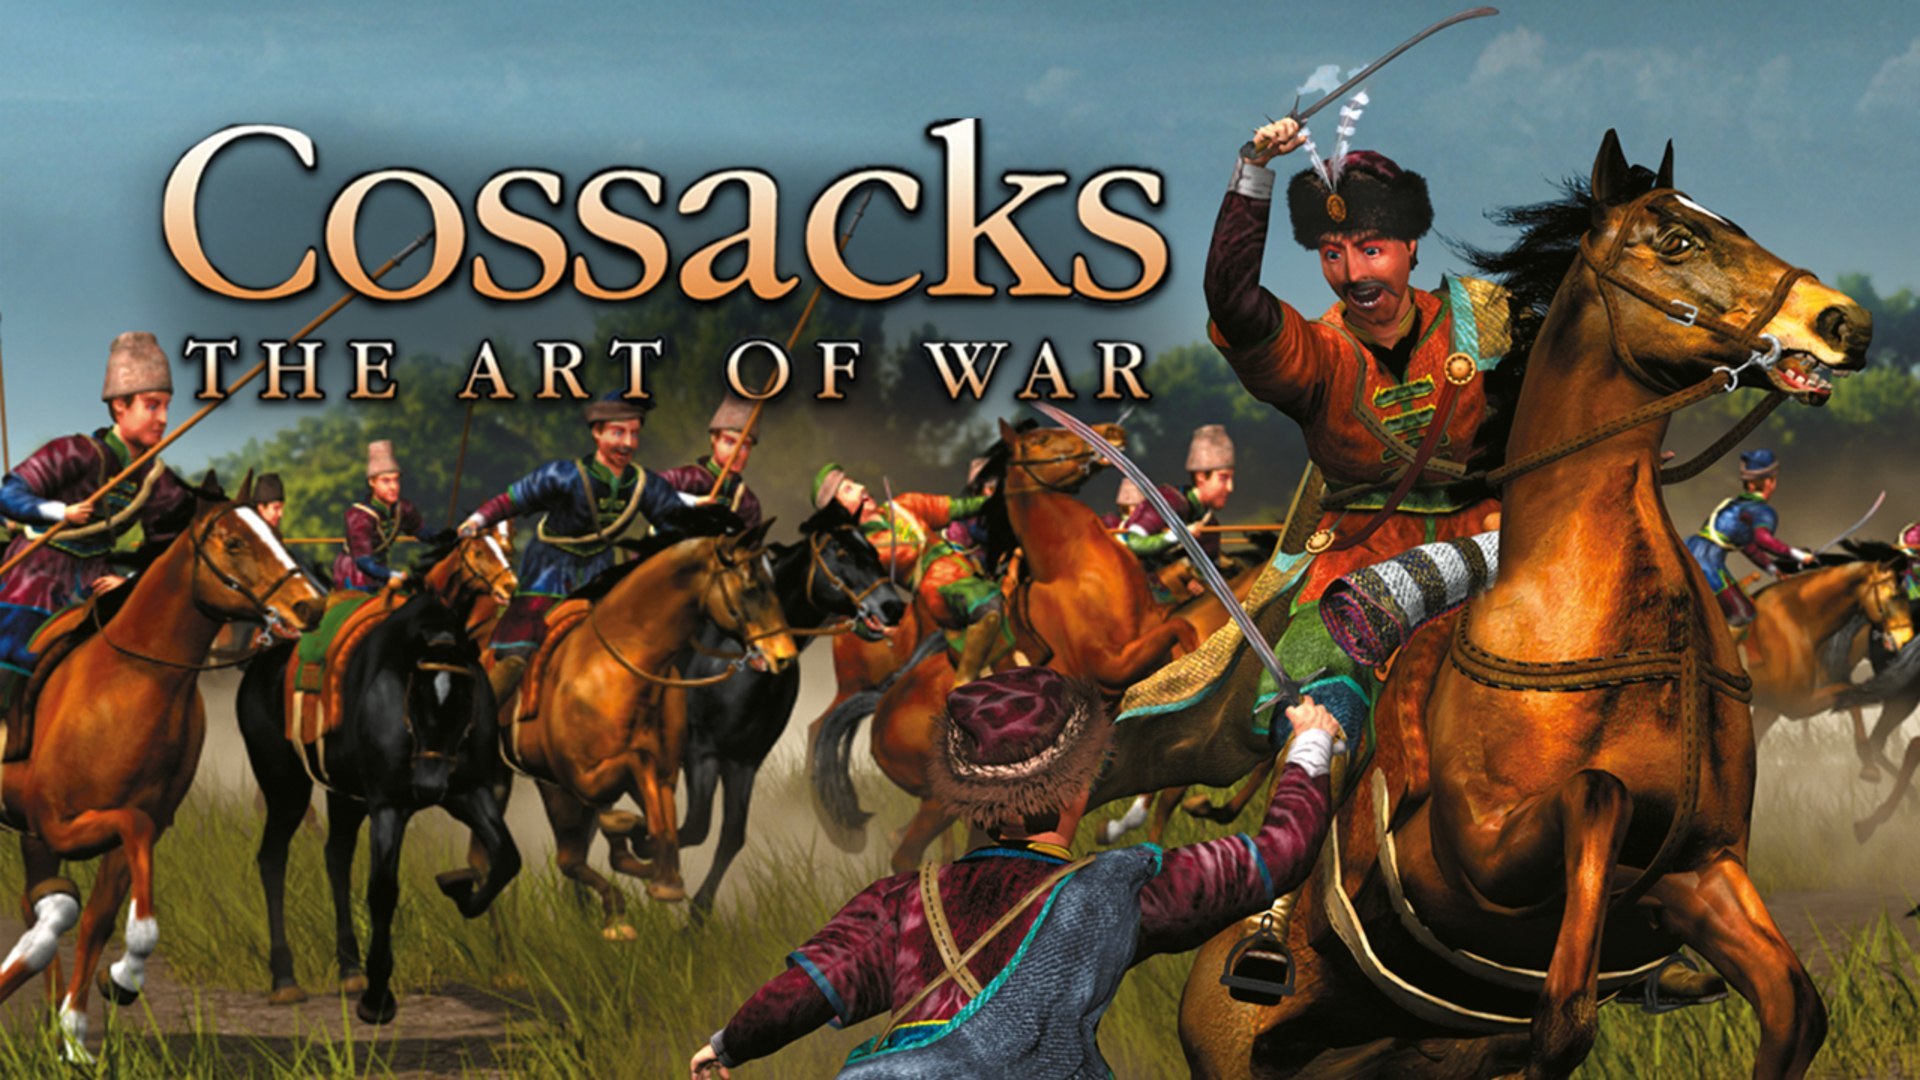 Archived replays from Cossacks.com